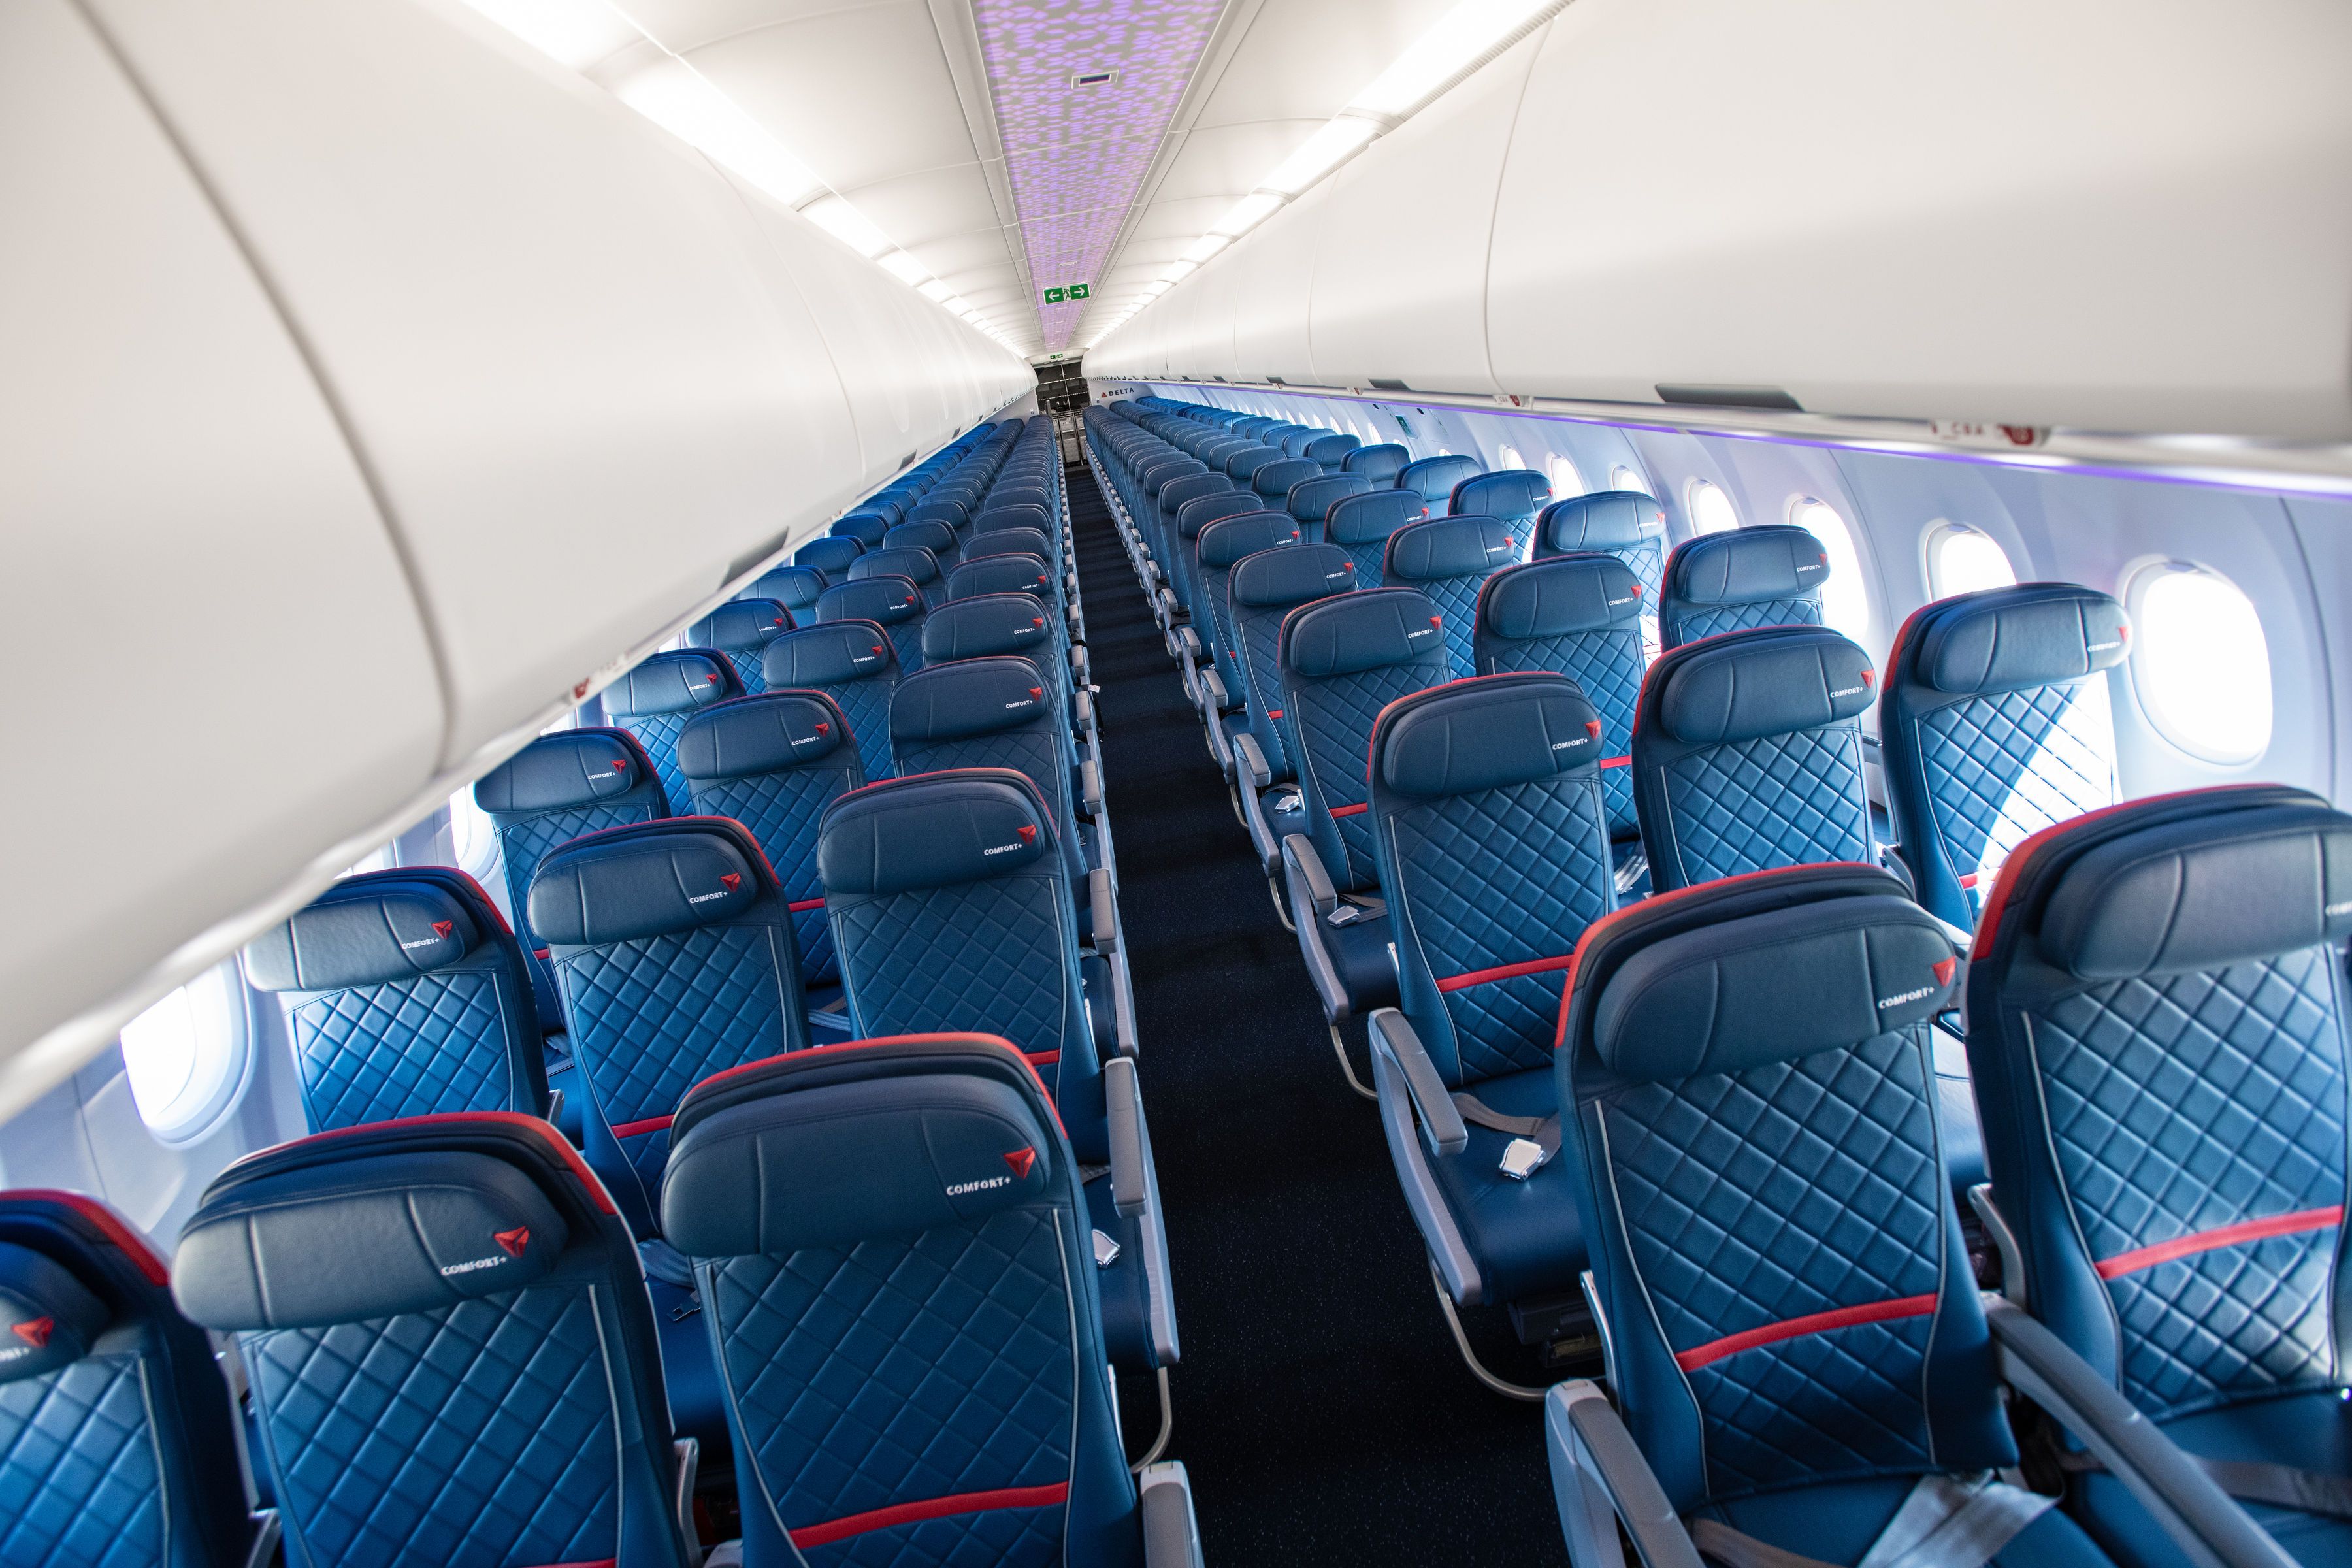 Delta's economy class cabin on its new A321neo aircraft